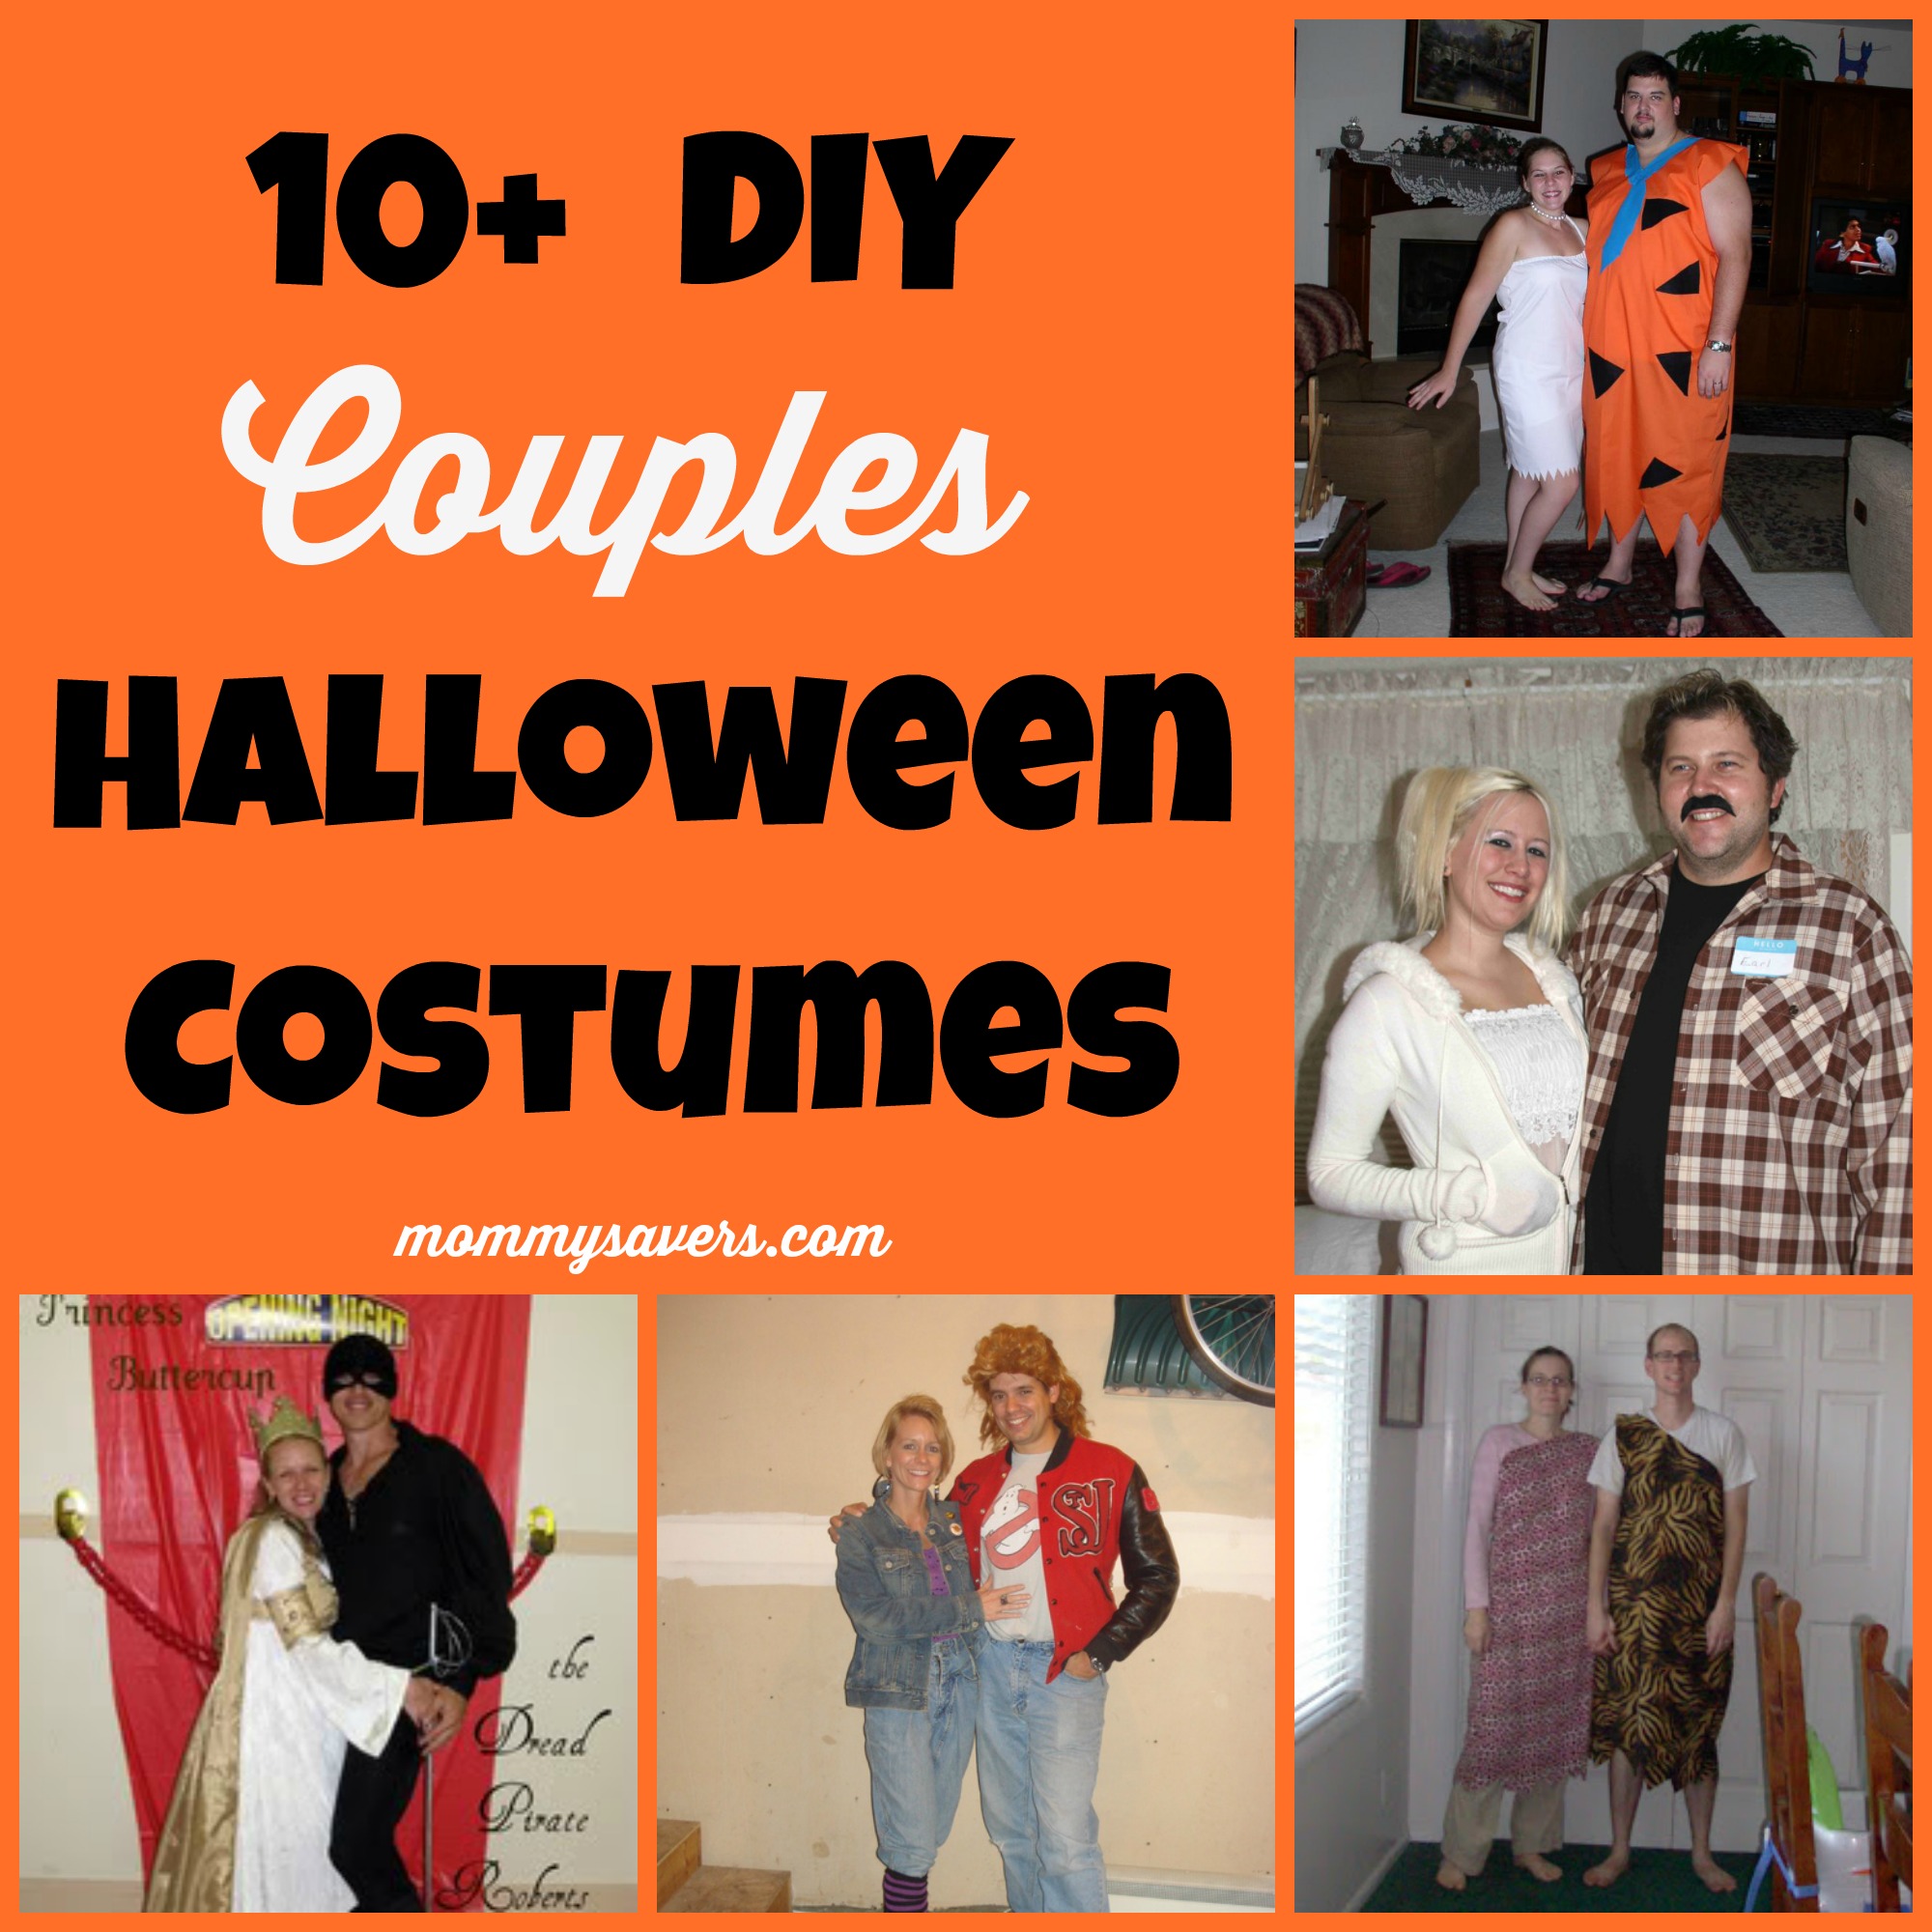 Costumes ideas  Halloween Couples costumes diy DIY   (10  Ideas) couples Mommysavers